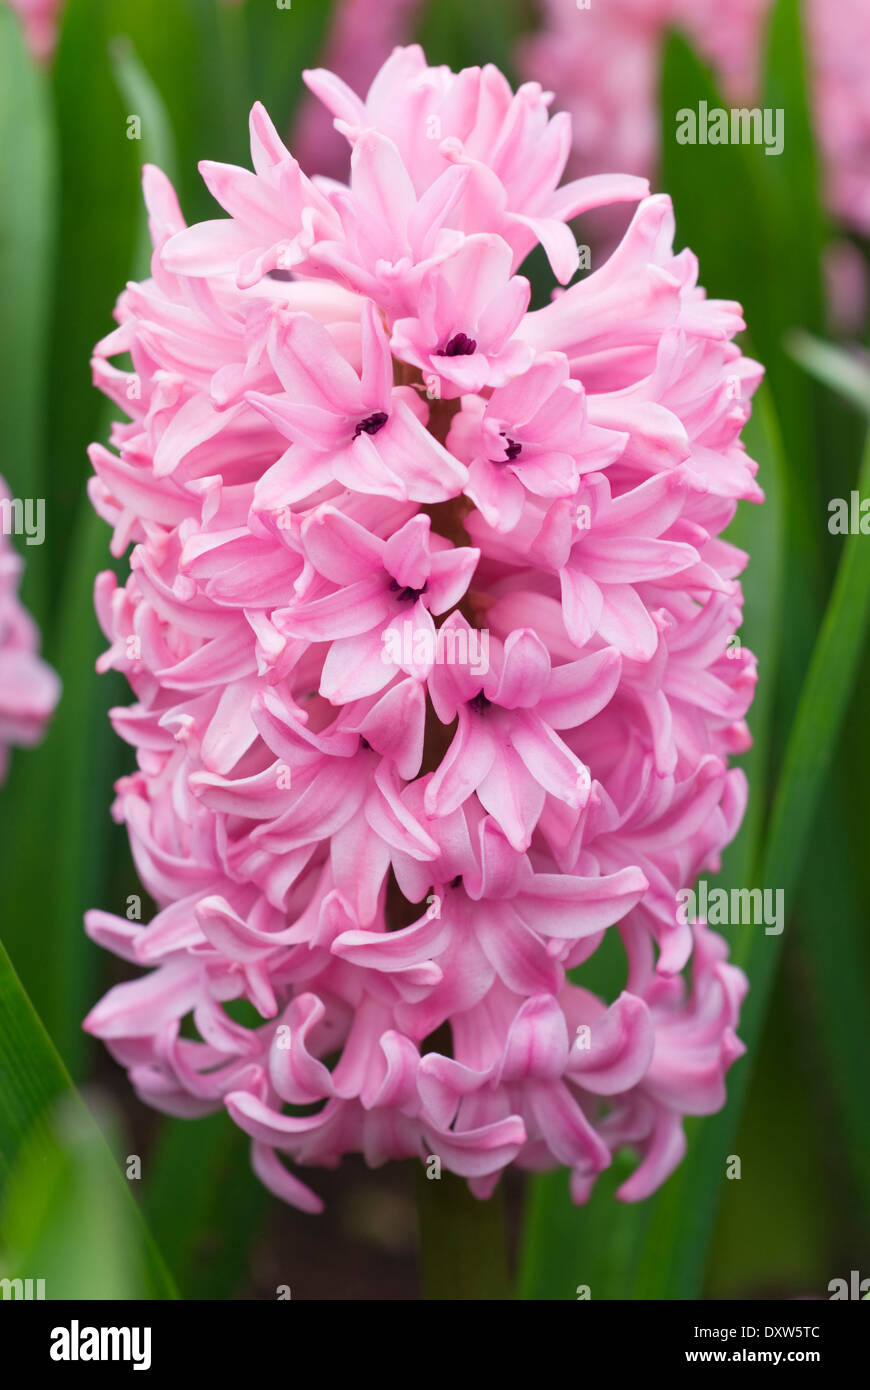 Hyacinthus orientalis Anna Marie,Hyacinth, Bulb, April. Pink scented flower Stock Photo